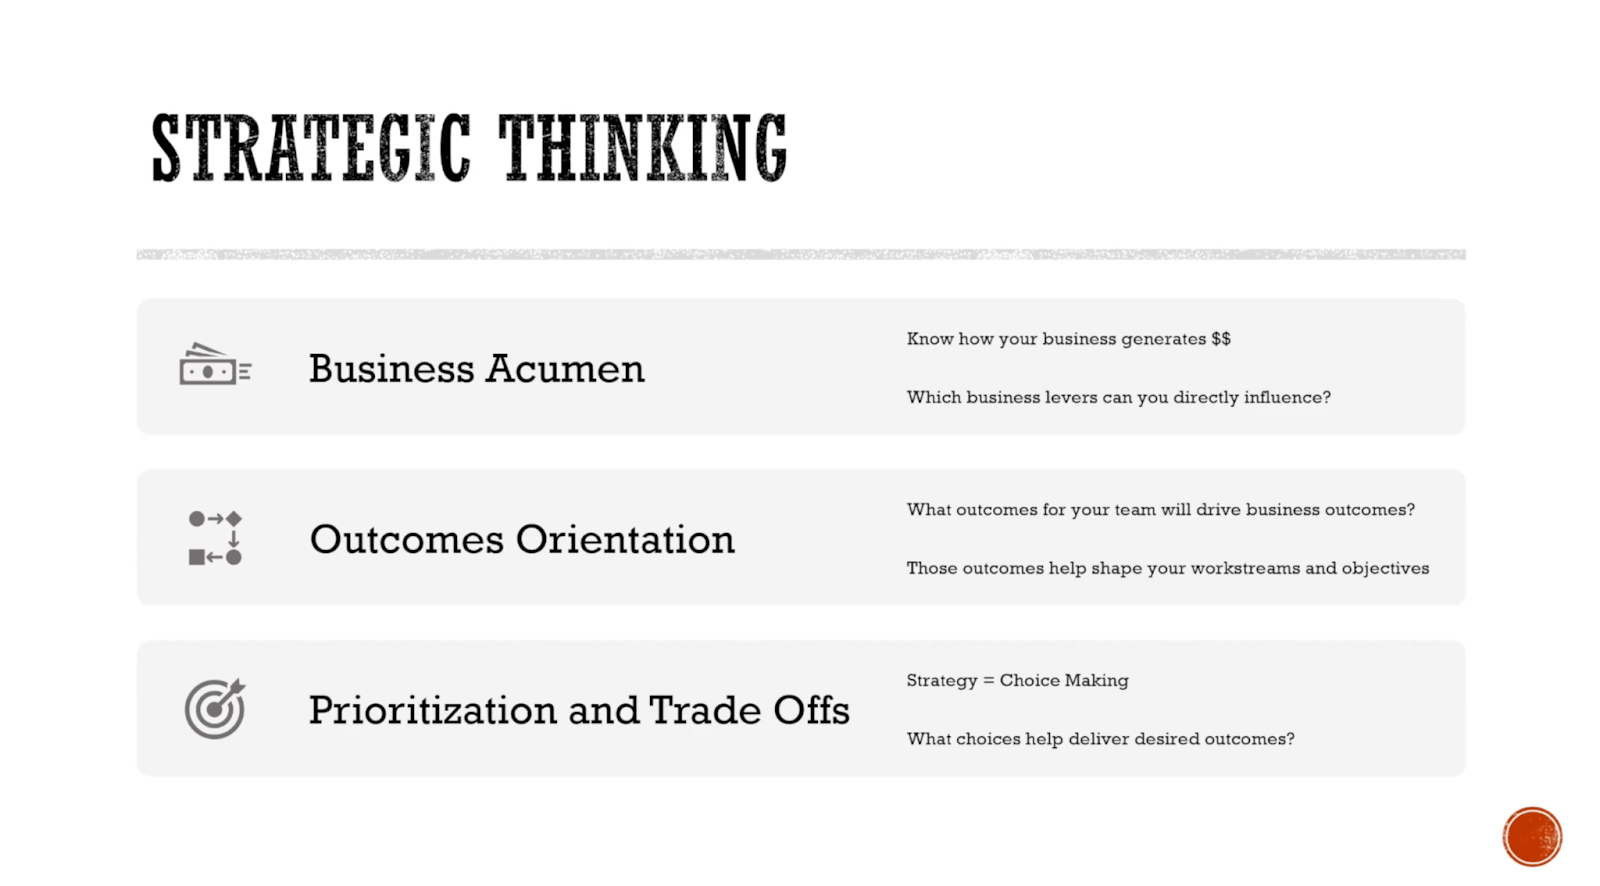 Three core skills of strategic thinking: Business acumen, outcomes orientation, and prioritization and tradeoffs.